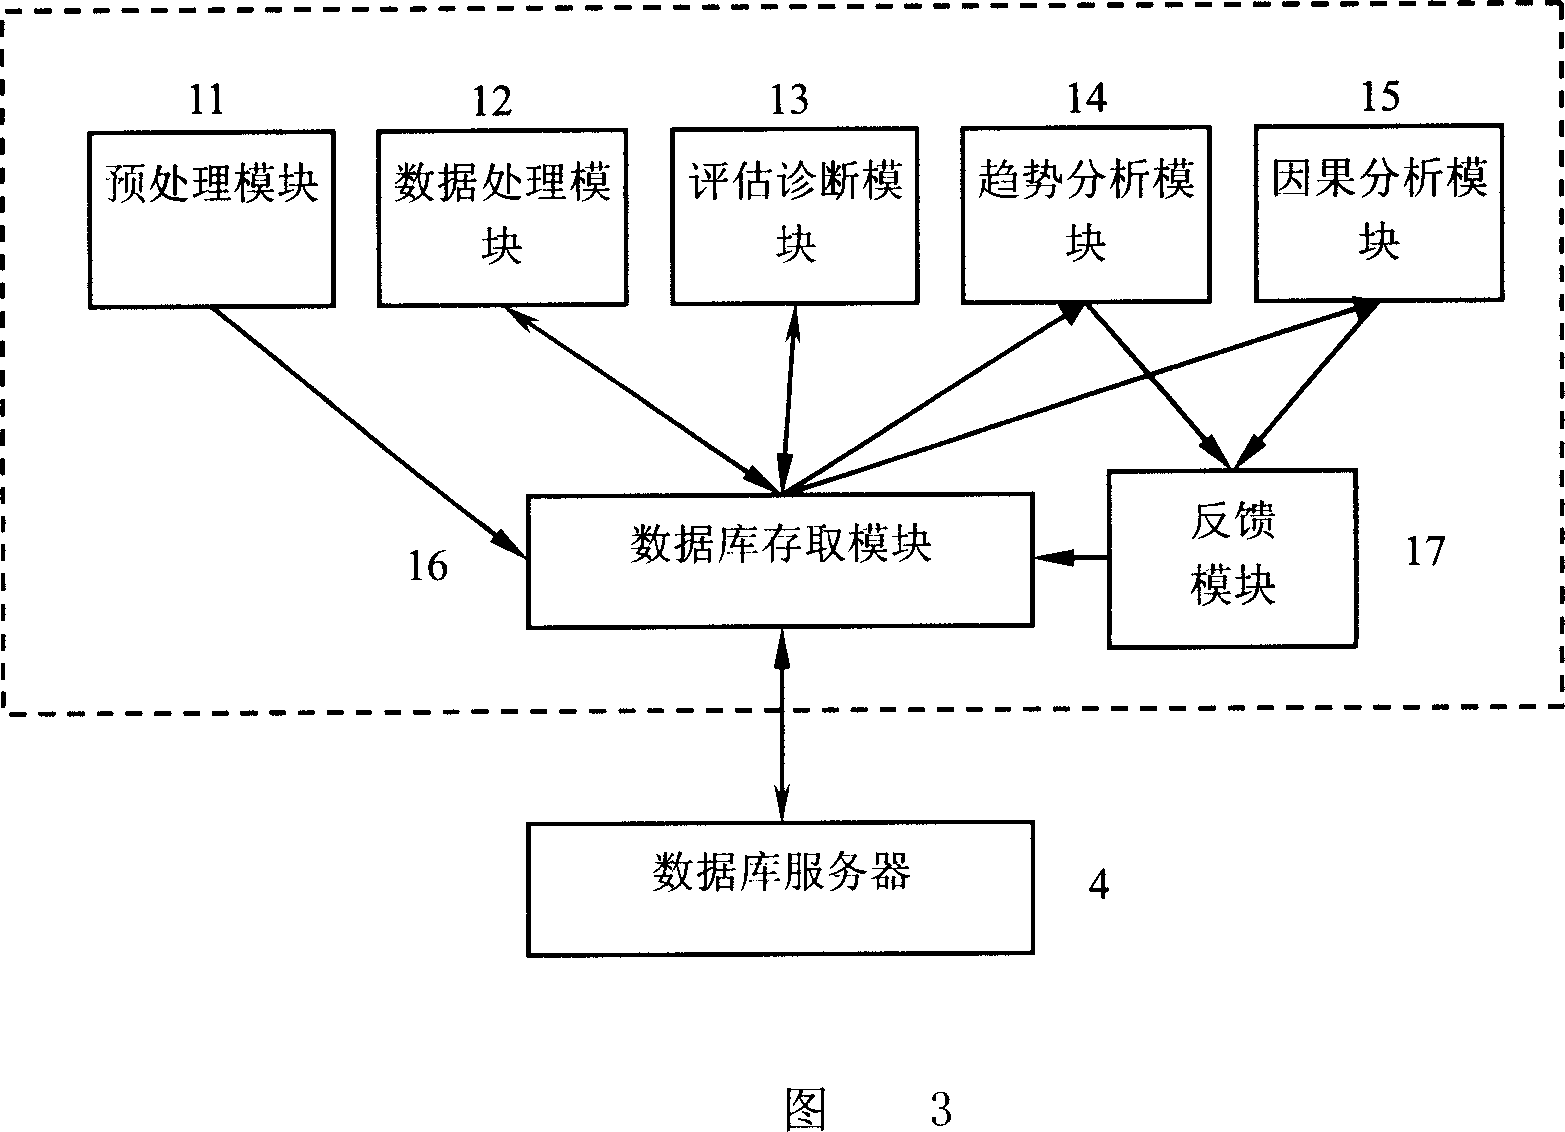 System and method for analyzing measuring wireless network data based on knowledge deduction